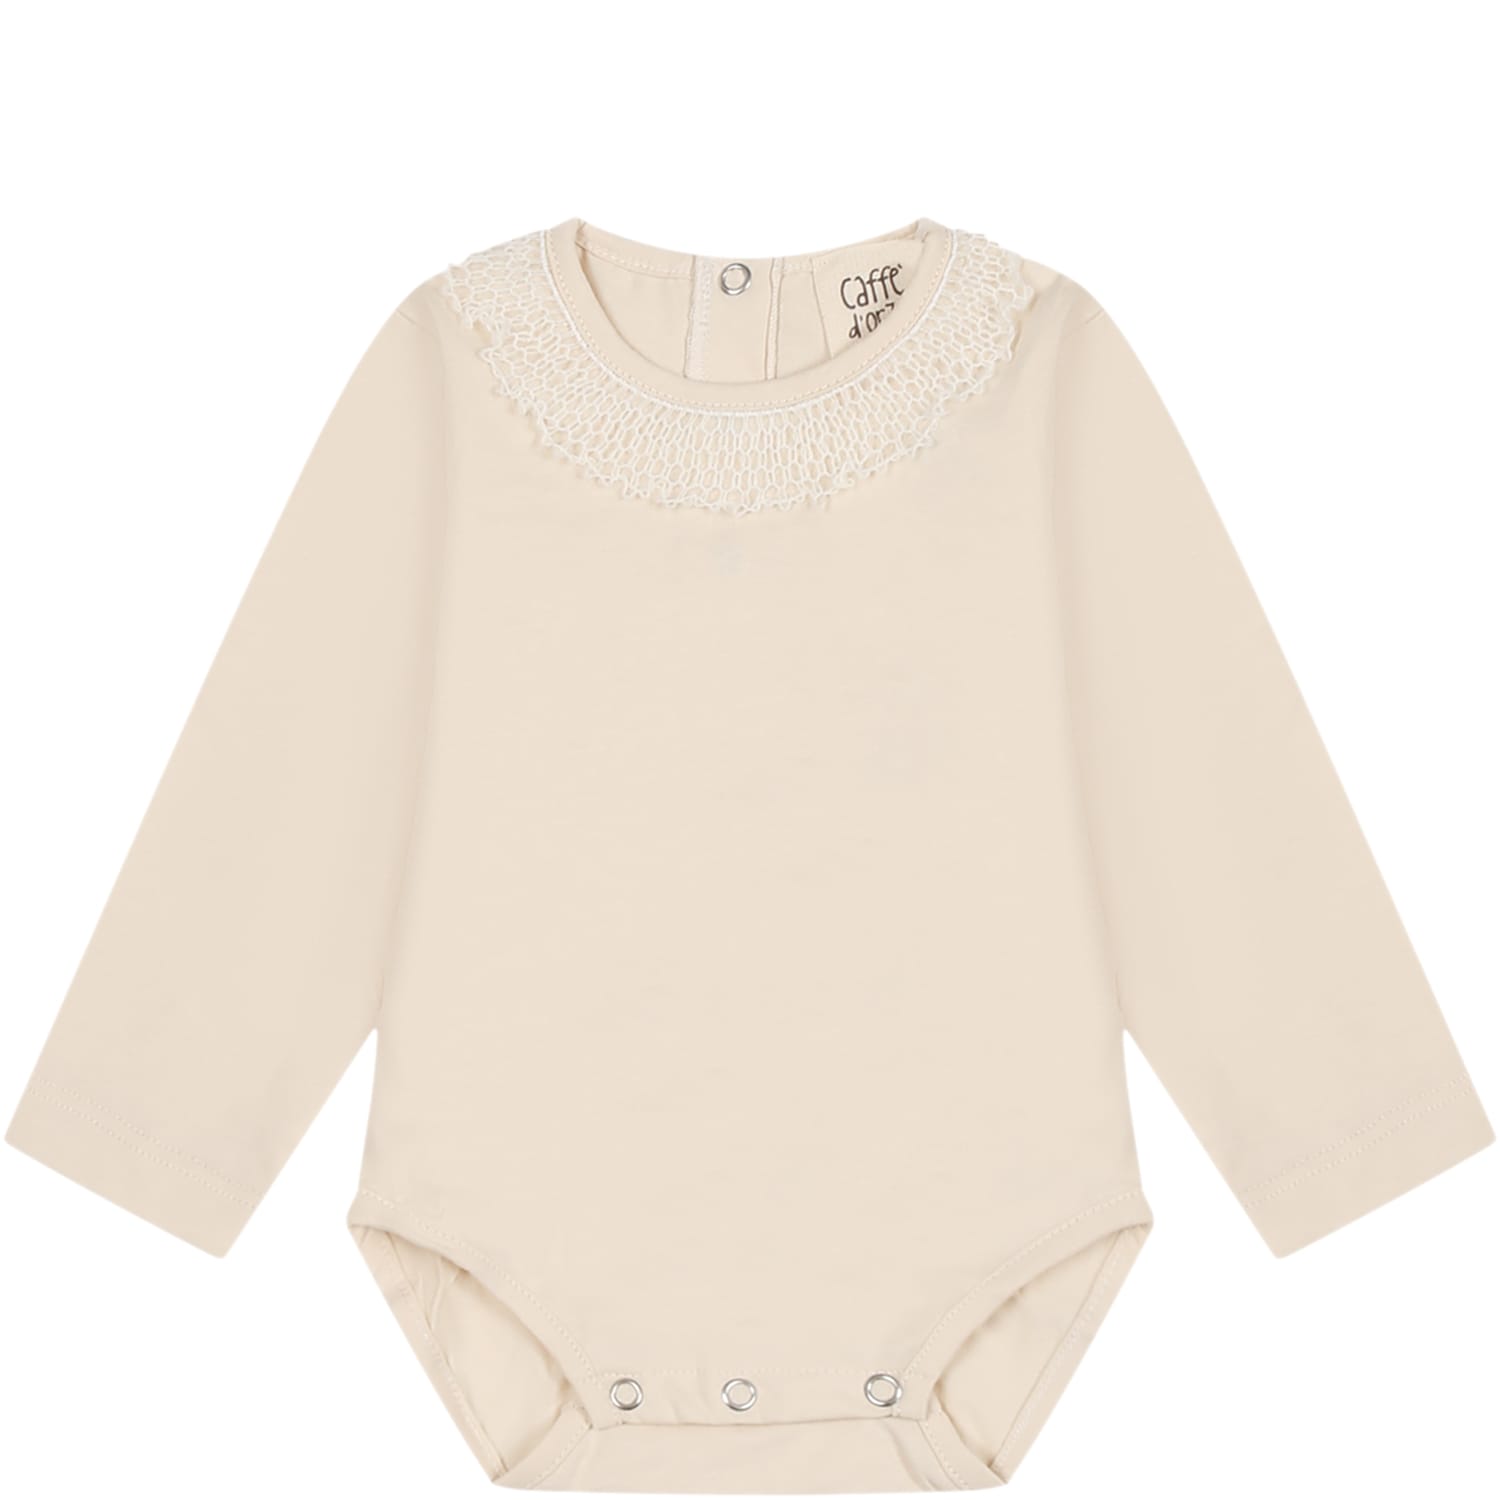 Caffe' D'orzo Ivory Body For Baby Girl With Ruffles In Cream Colour